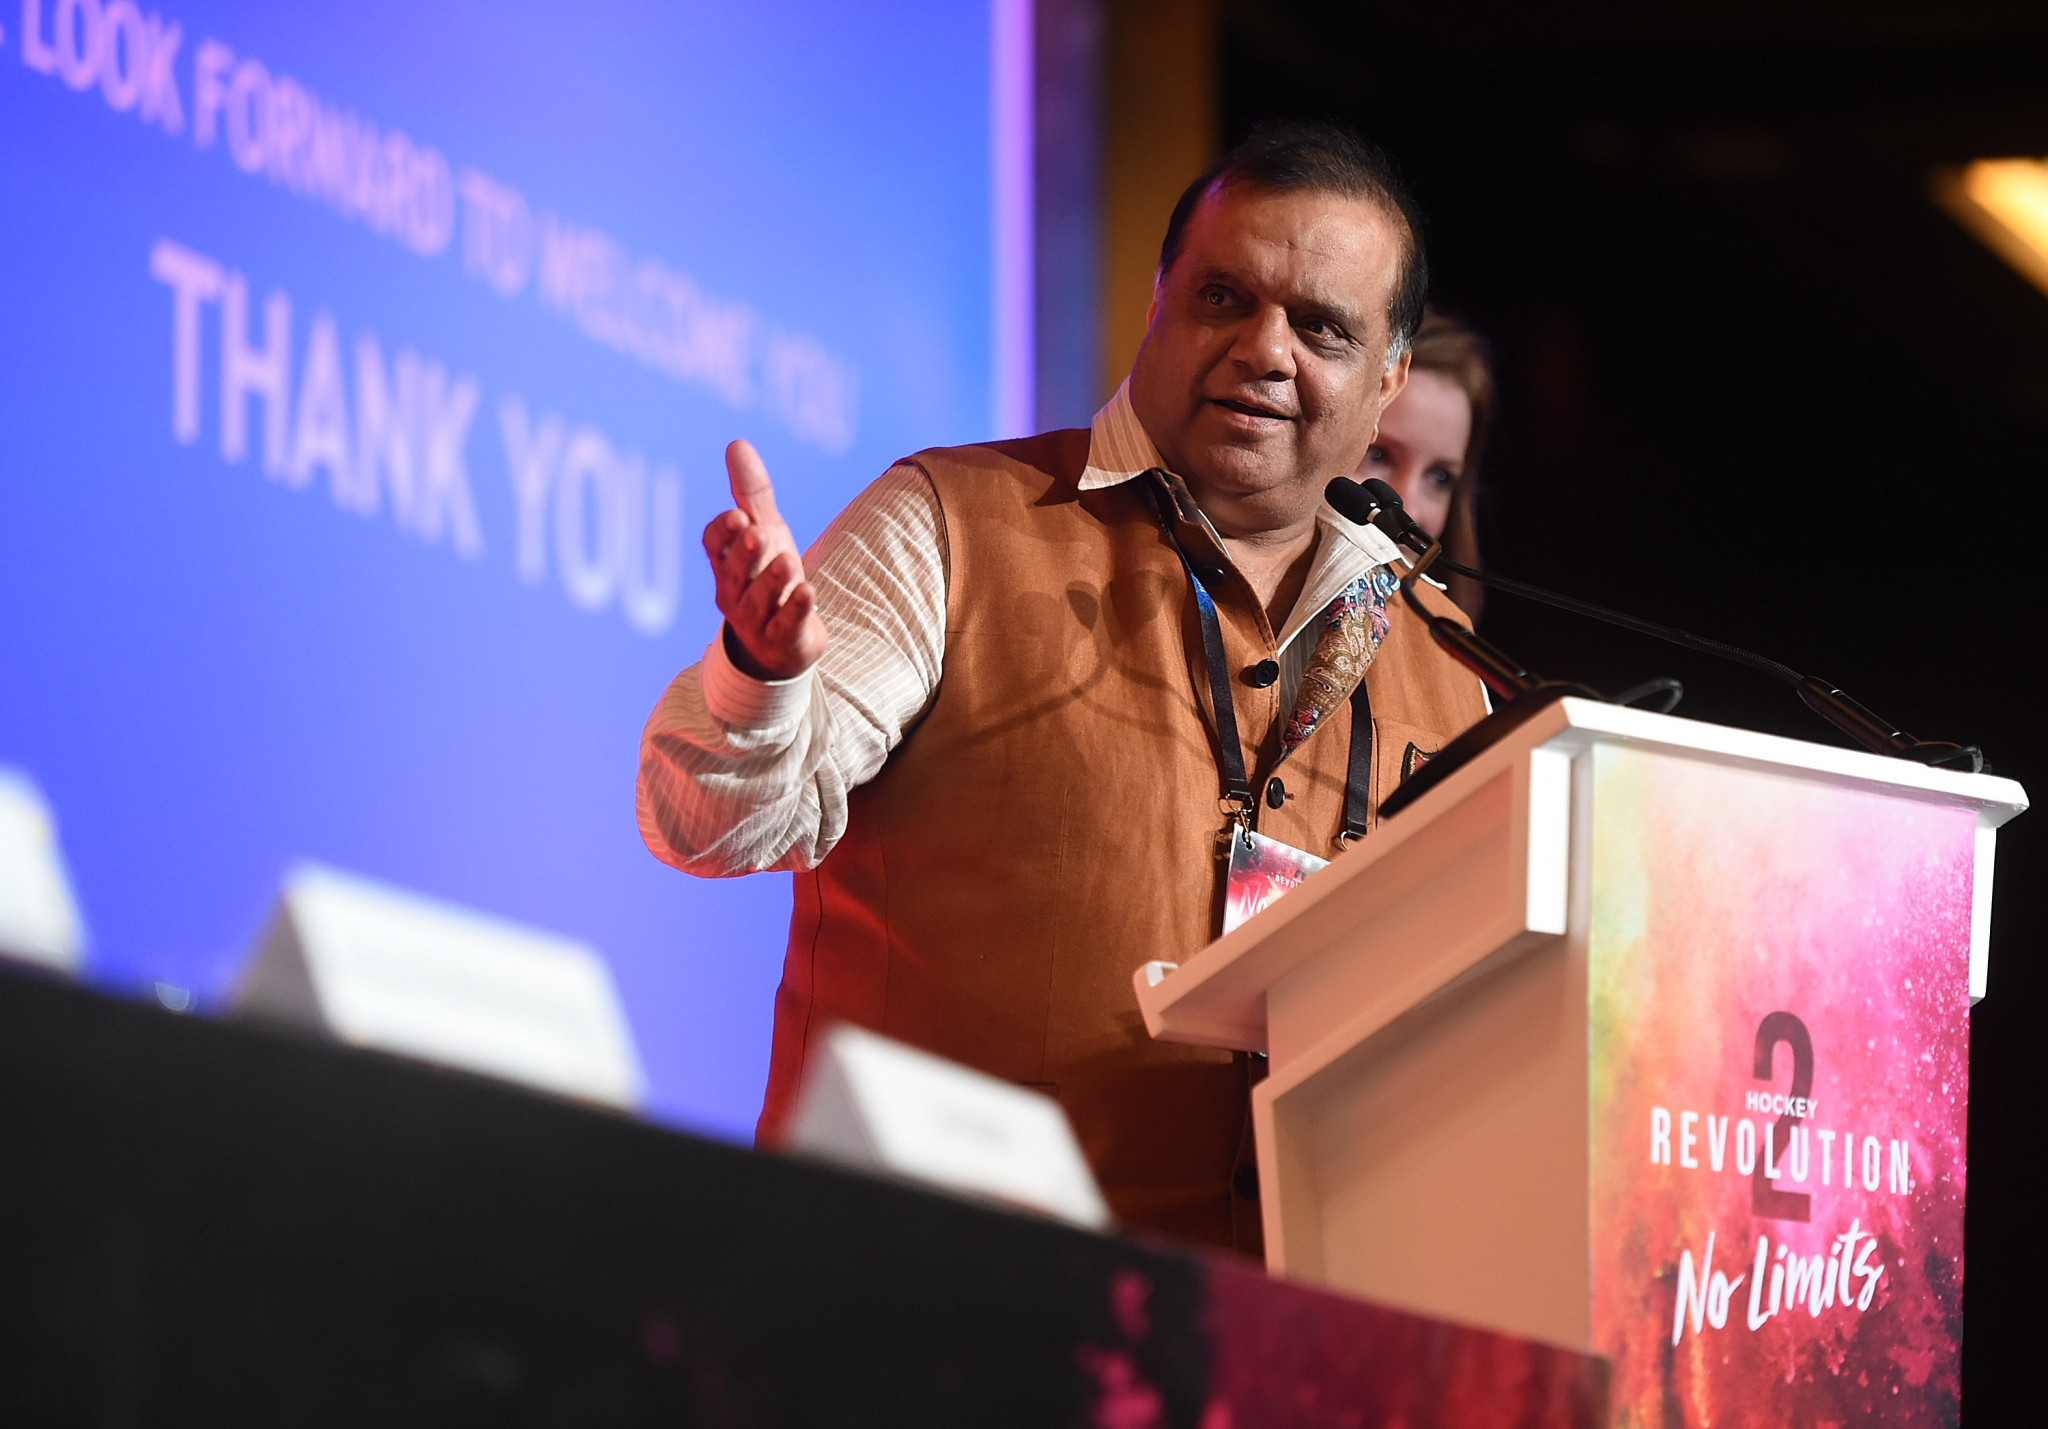 Batra targets 2026 Commonwealth Games bid after elected Indian Olympic Association President